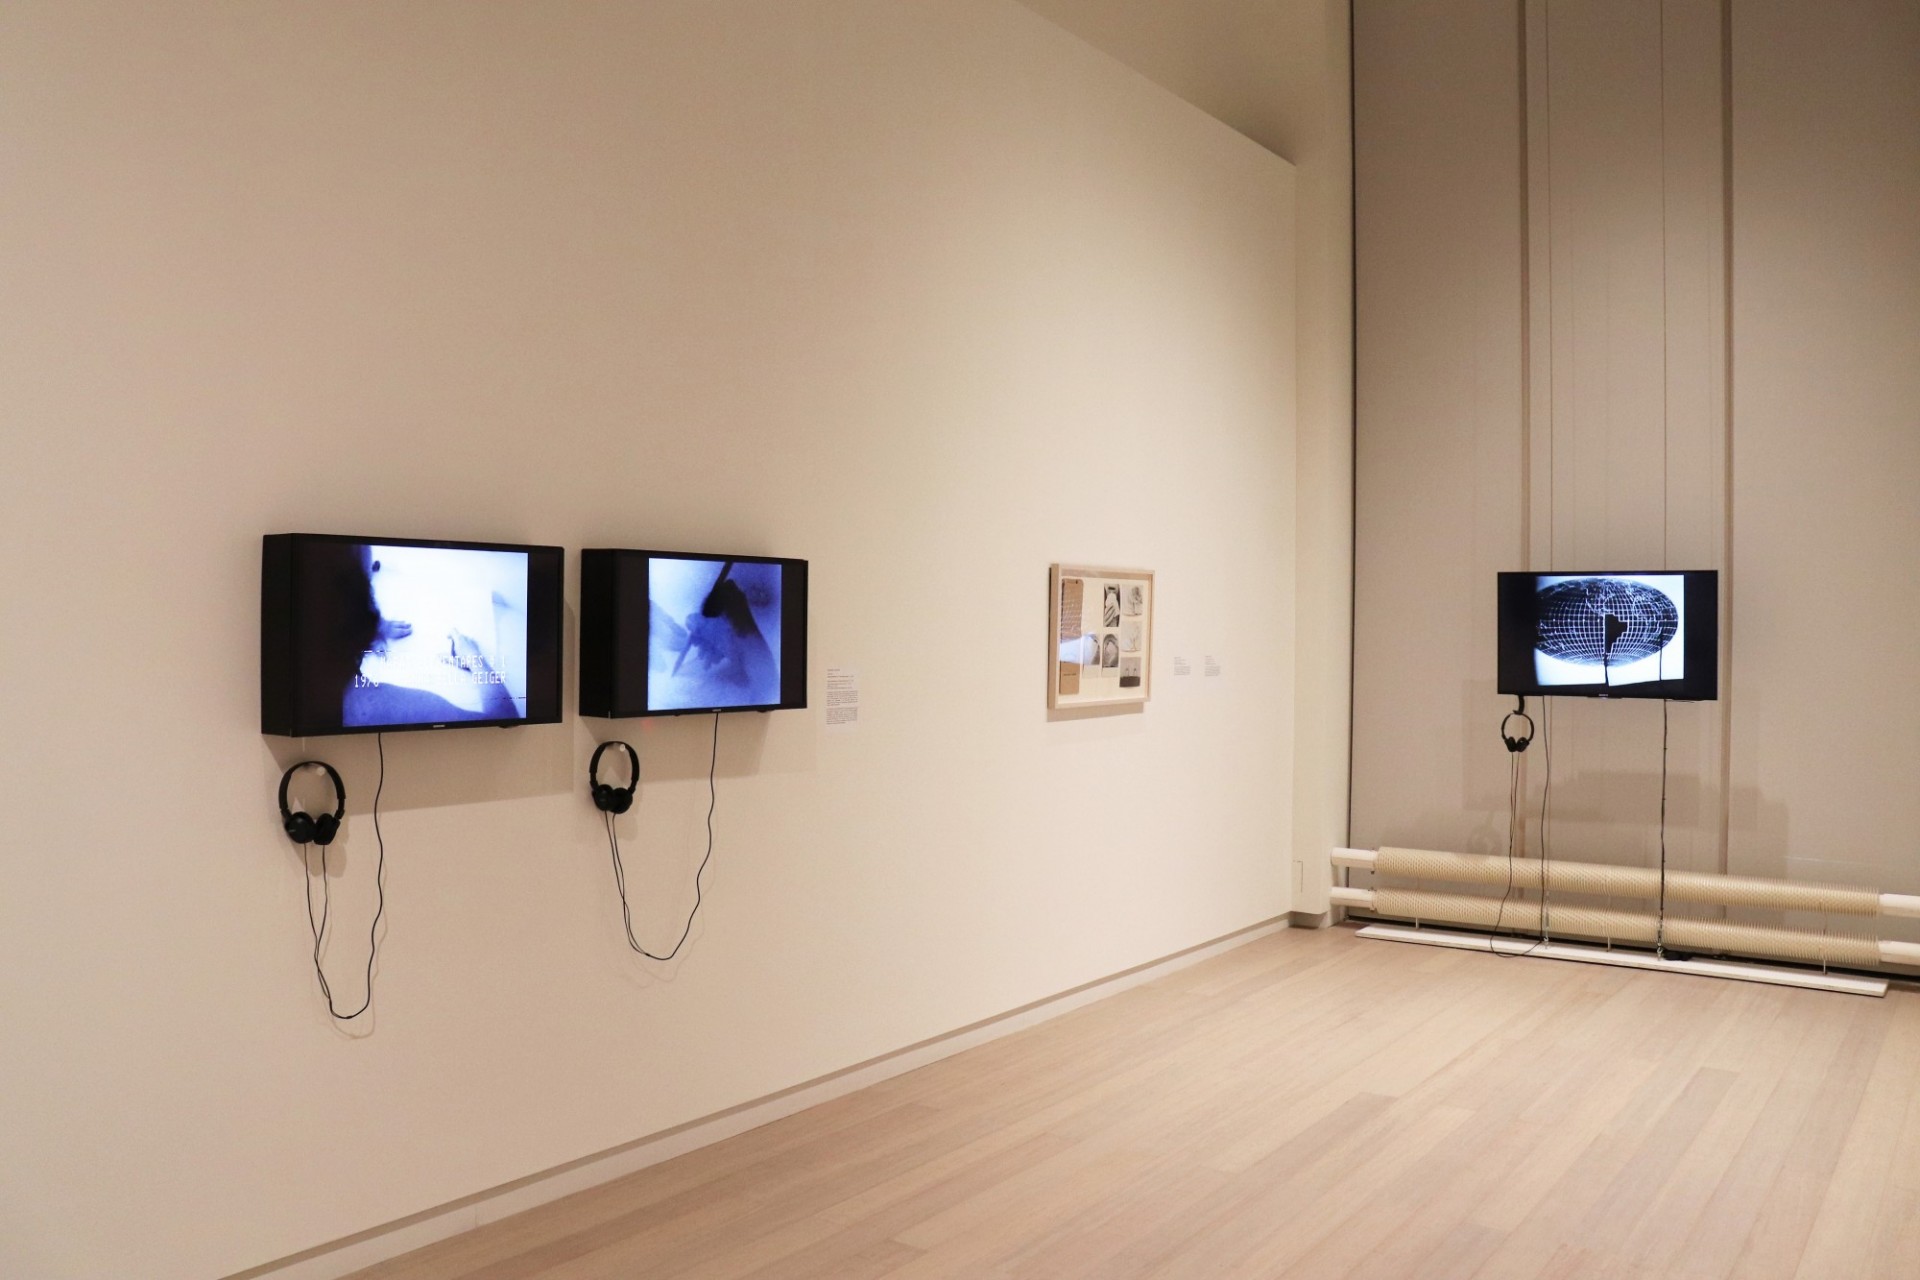 Installation view of the 2018 presentation of "MODA Curates" on view at the Wallach Art Gallery, Columbia University March 24–April 8, 2018. Photo by Eddie Bartolomei.